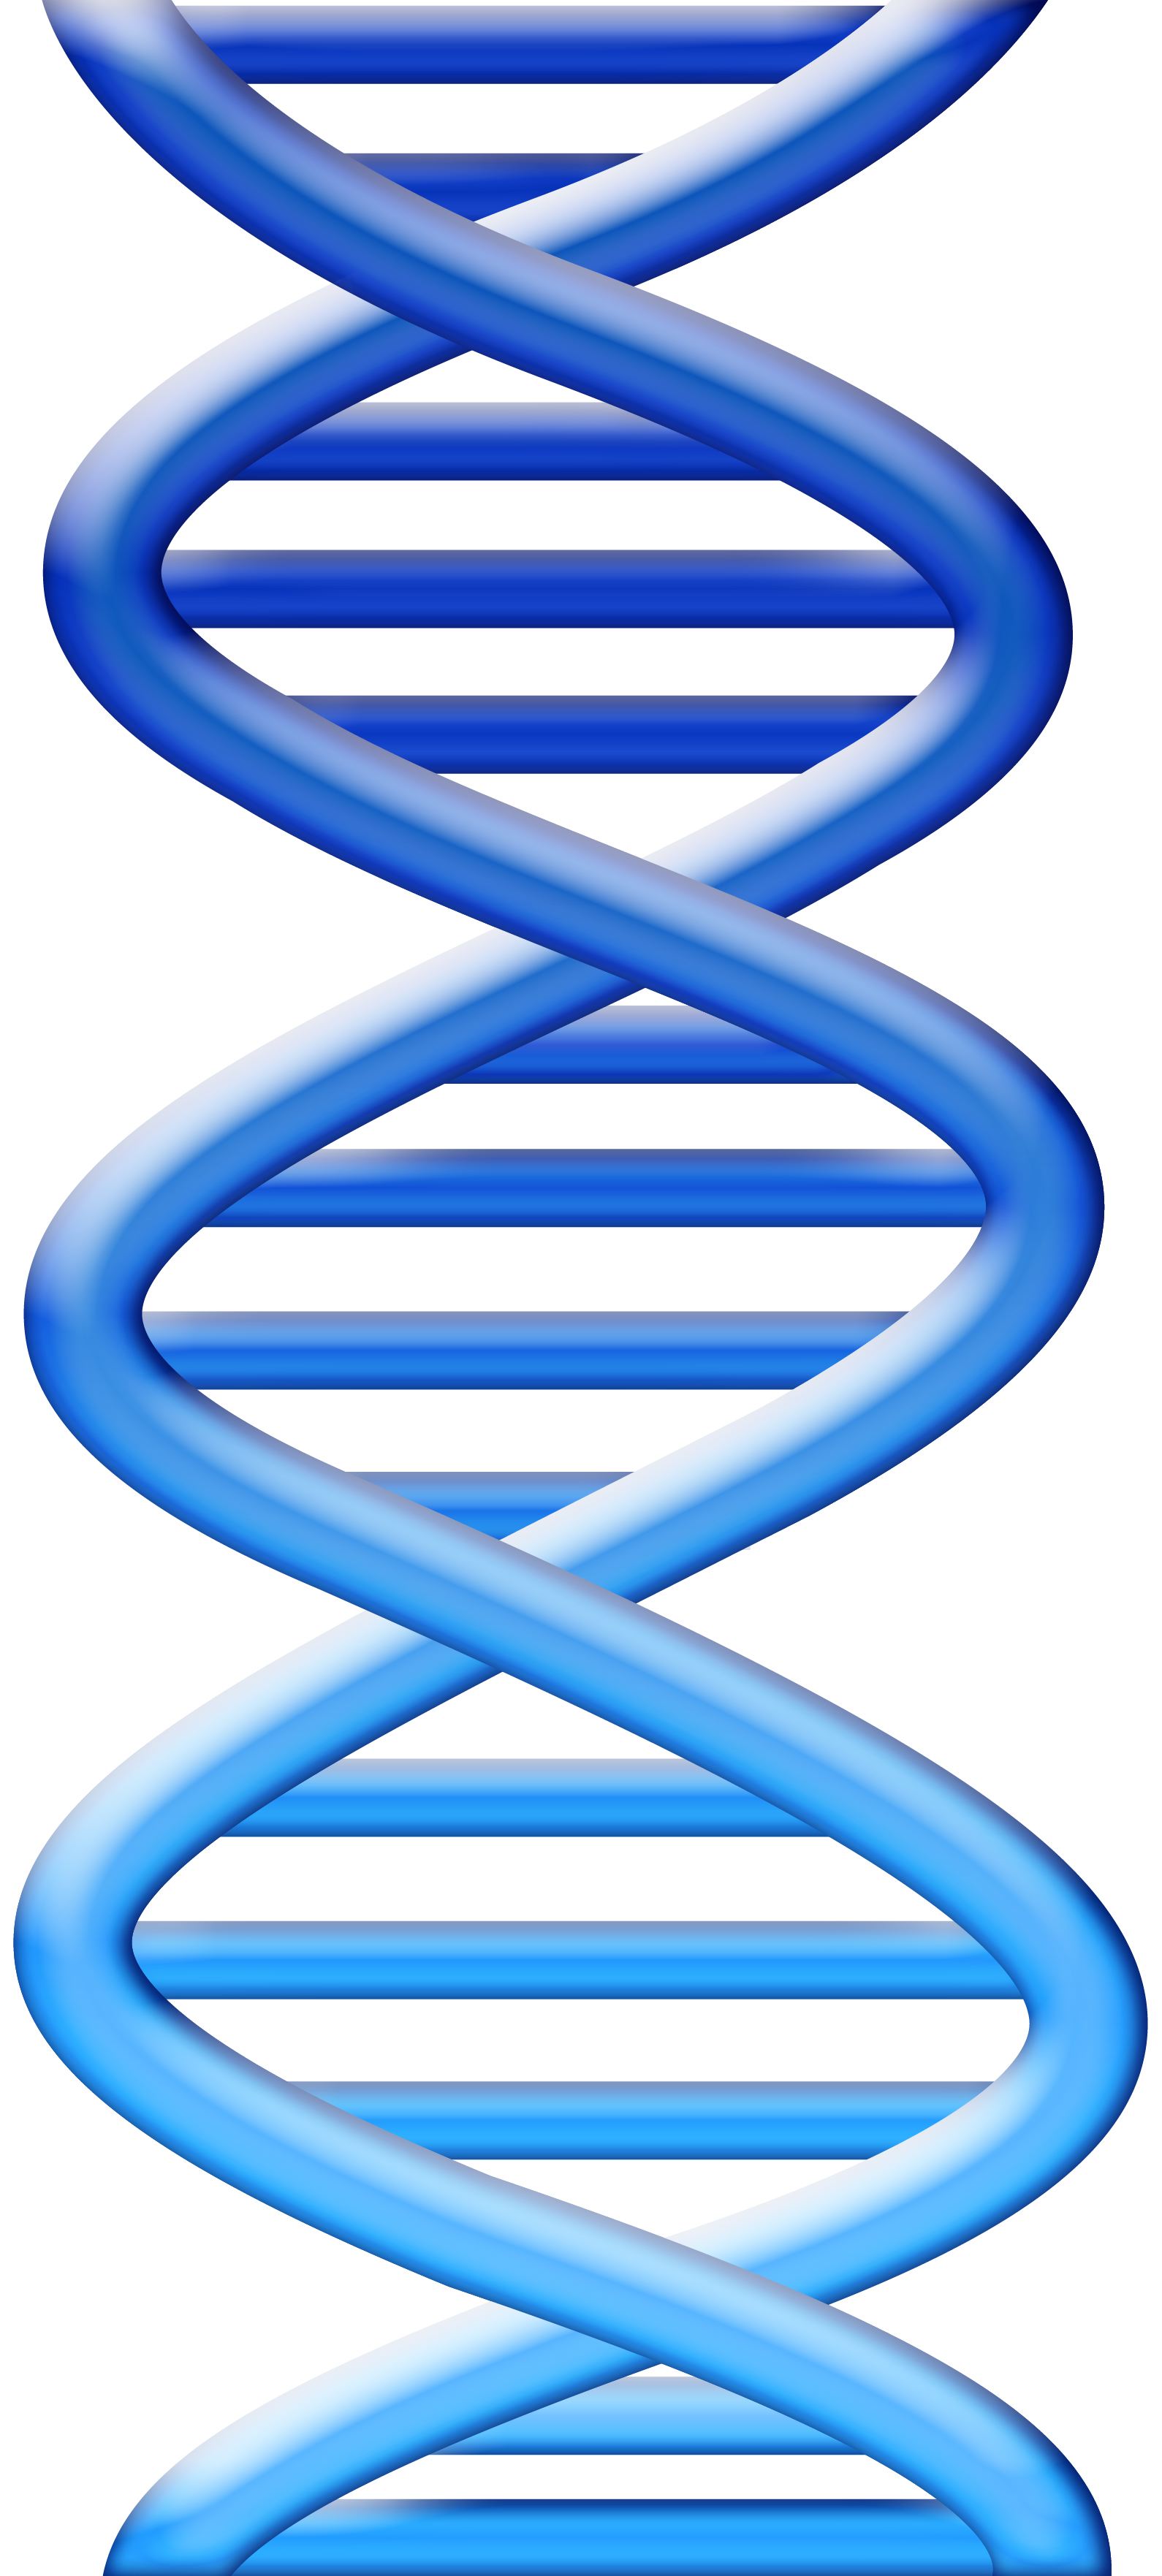 Dna clipart free download.